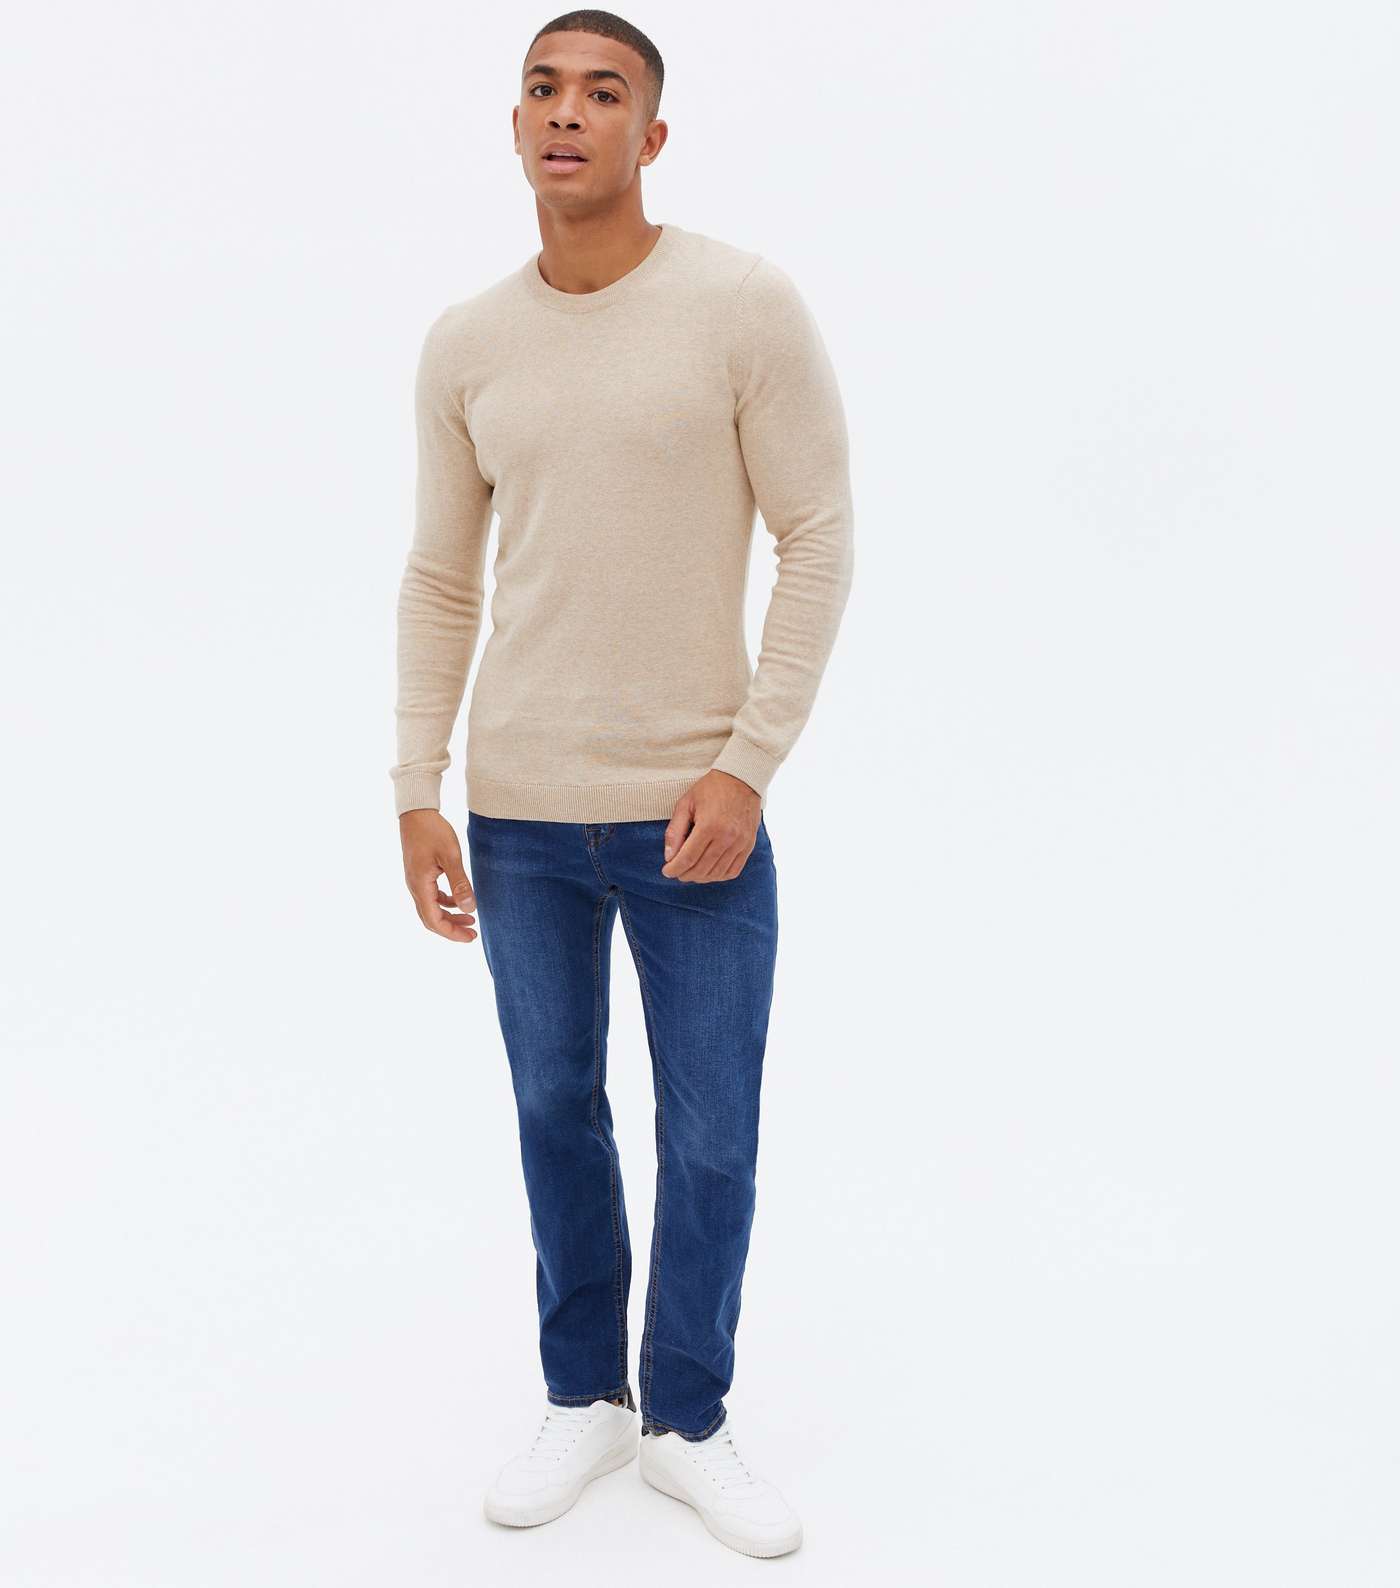 Off White Fine Knit Muscle Fit Crew Jumper Image 2